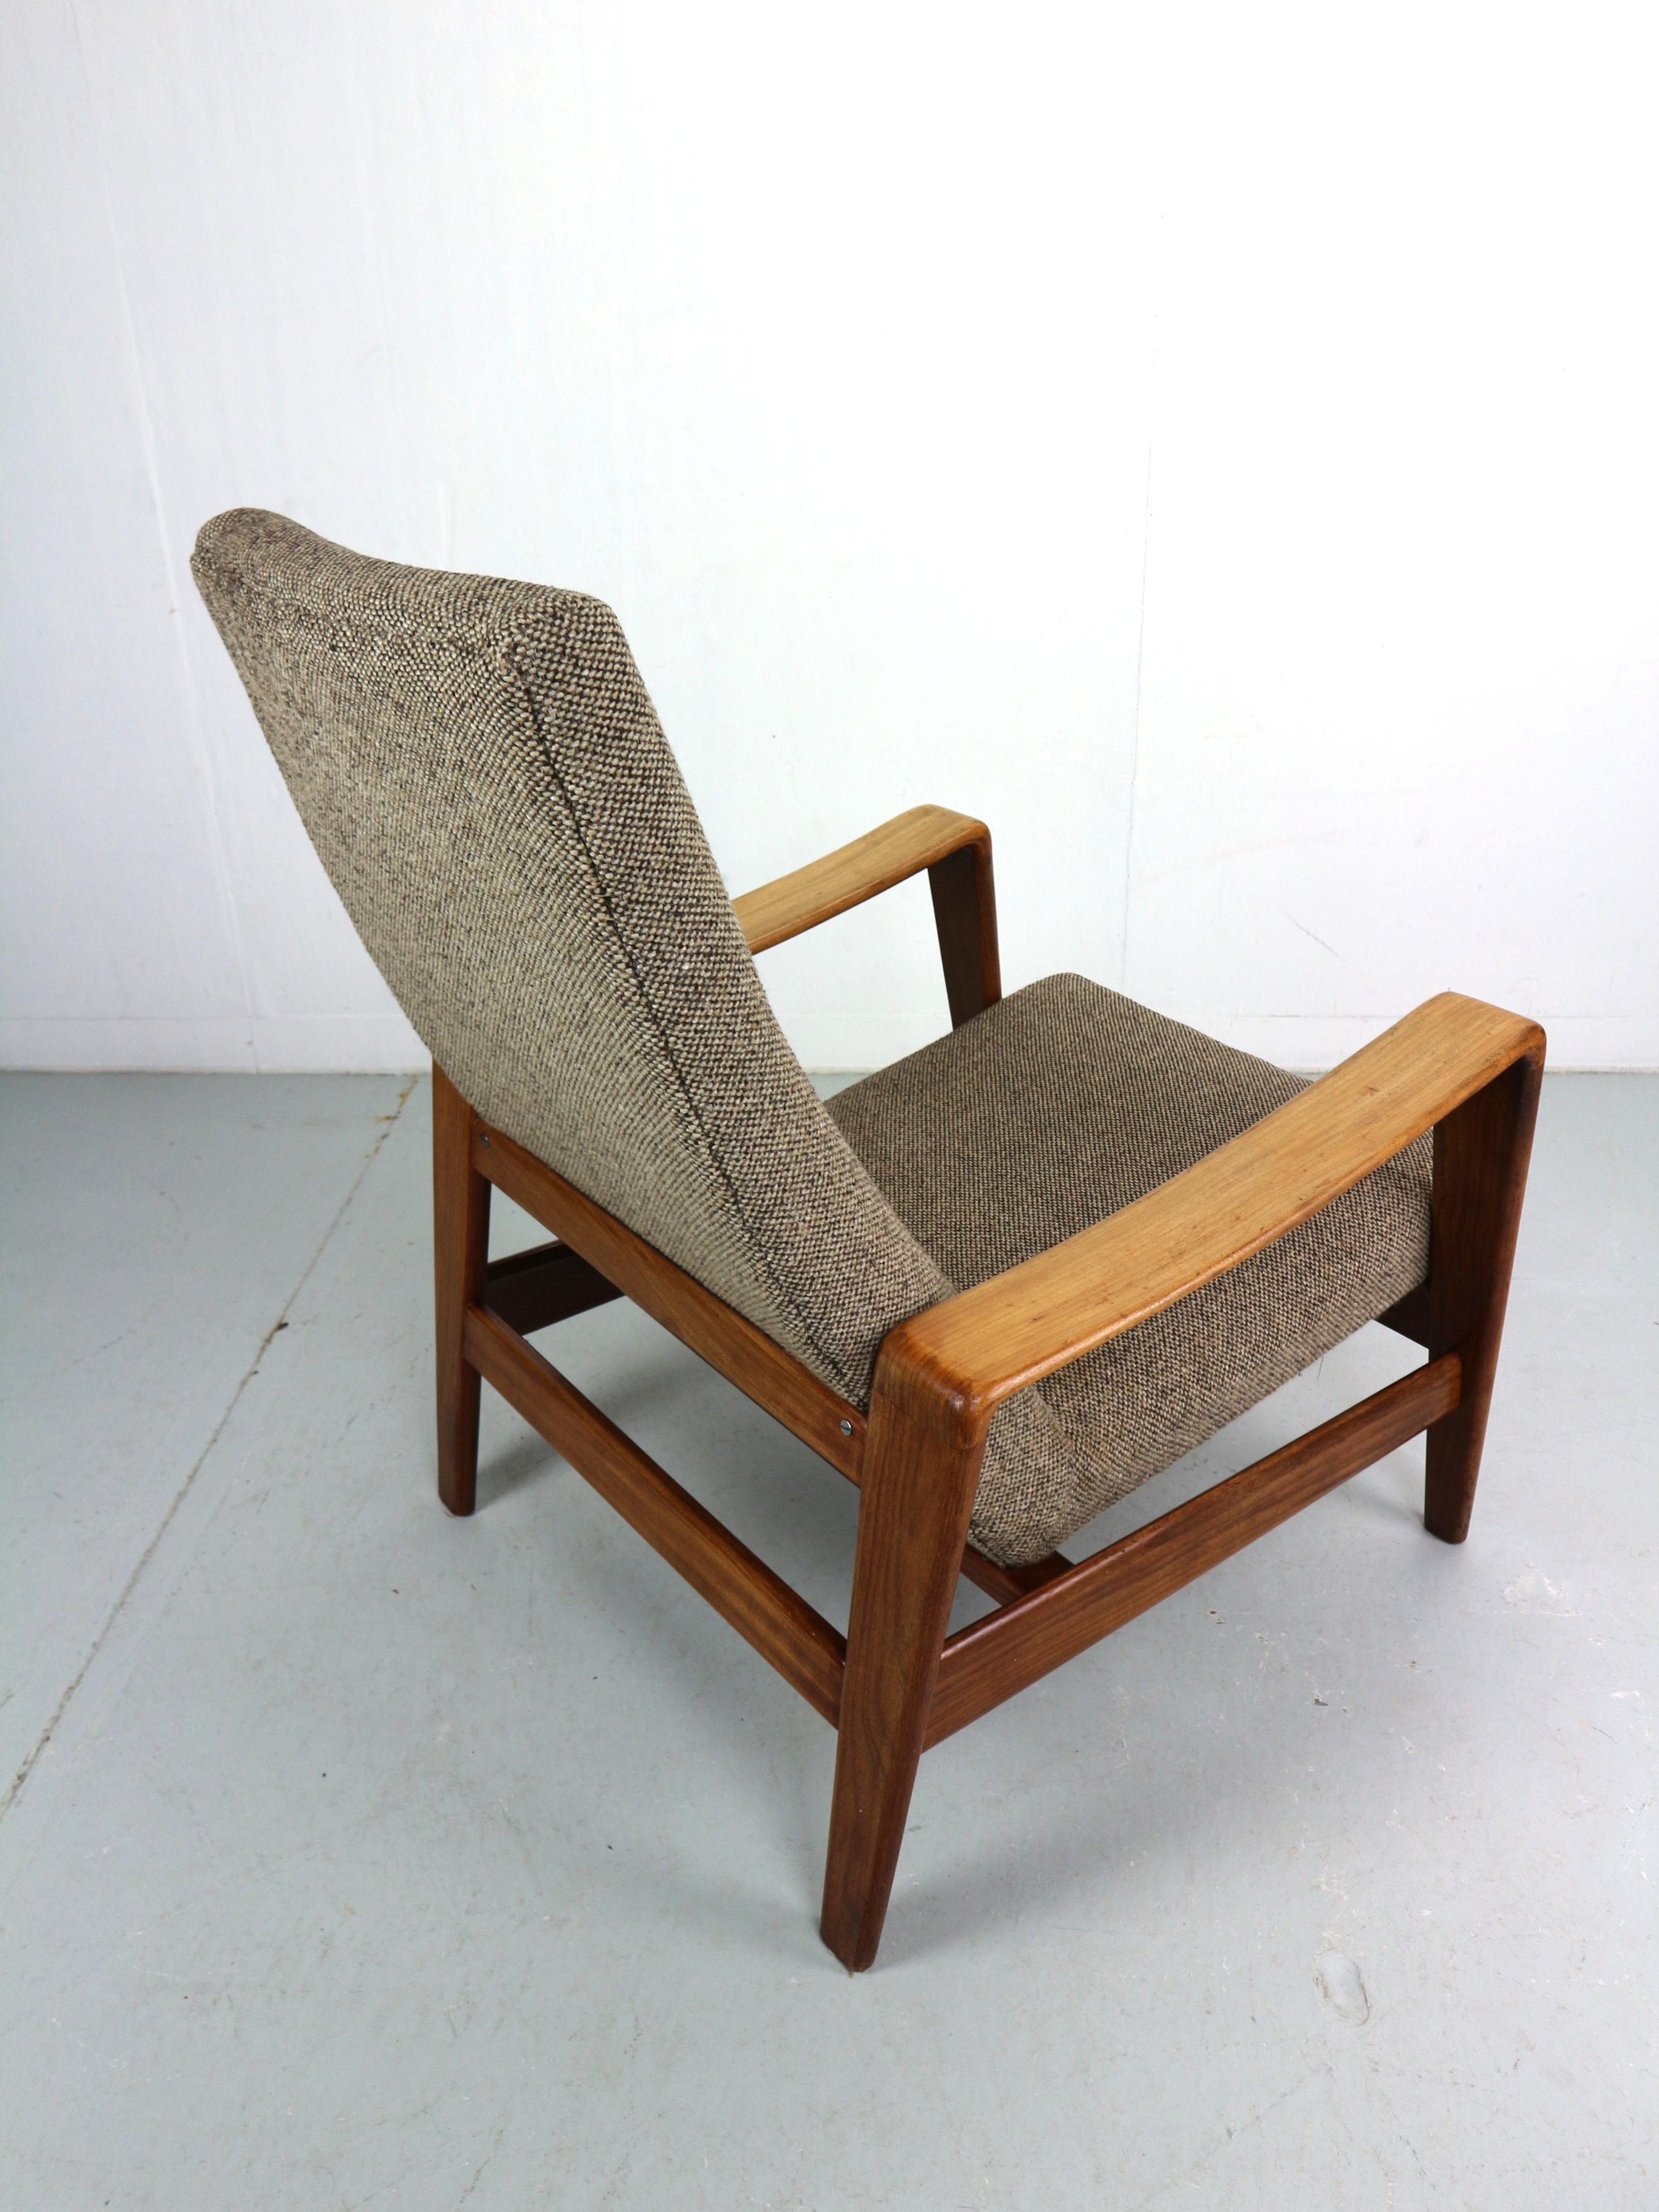 20th Century Lounge Chair by Arne Wahl Iversen for Komfort, 1960s